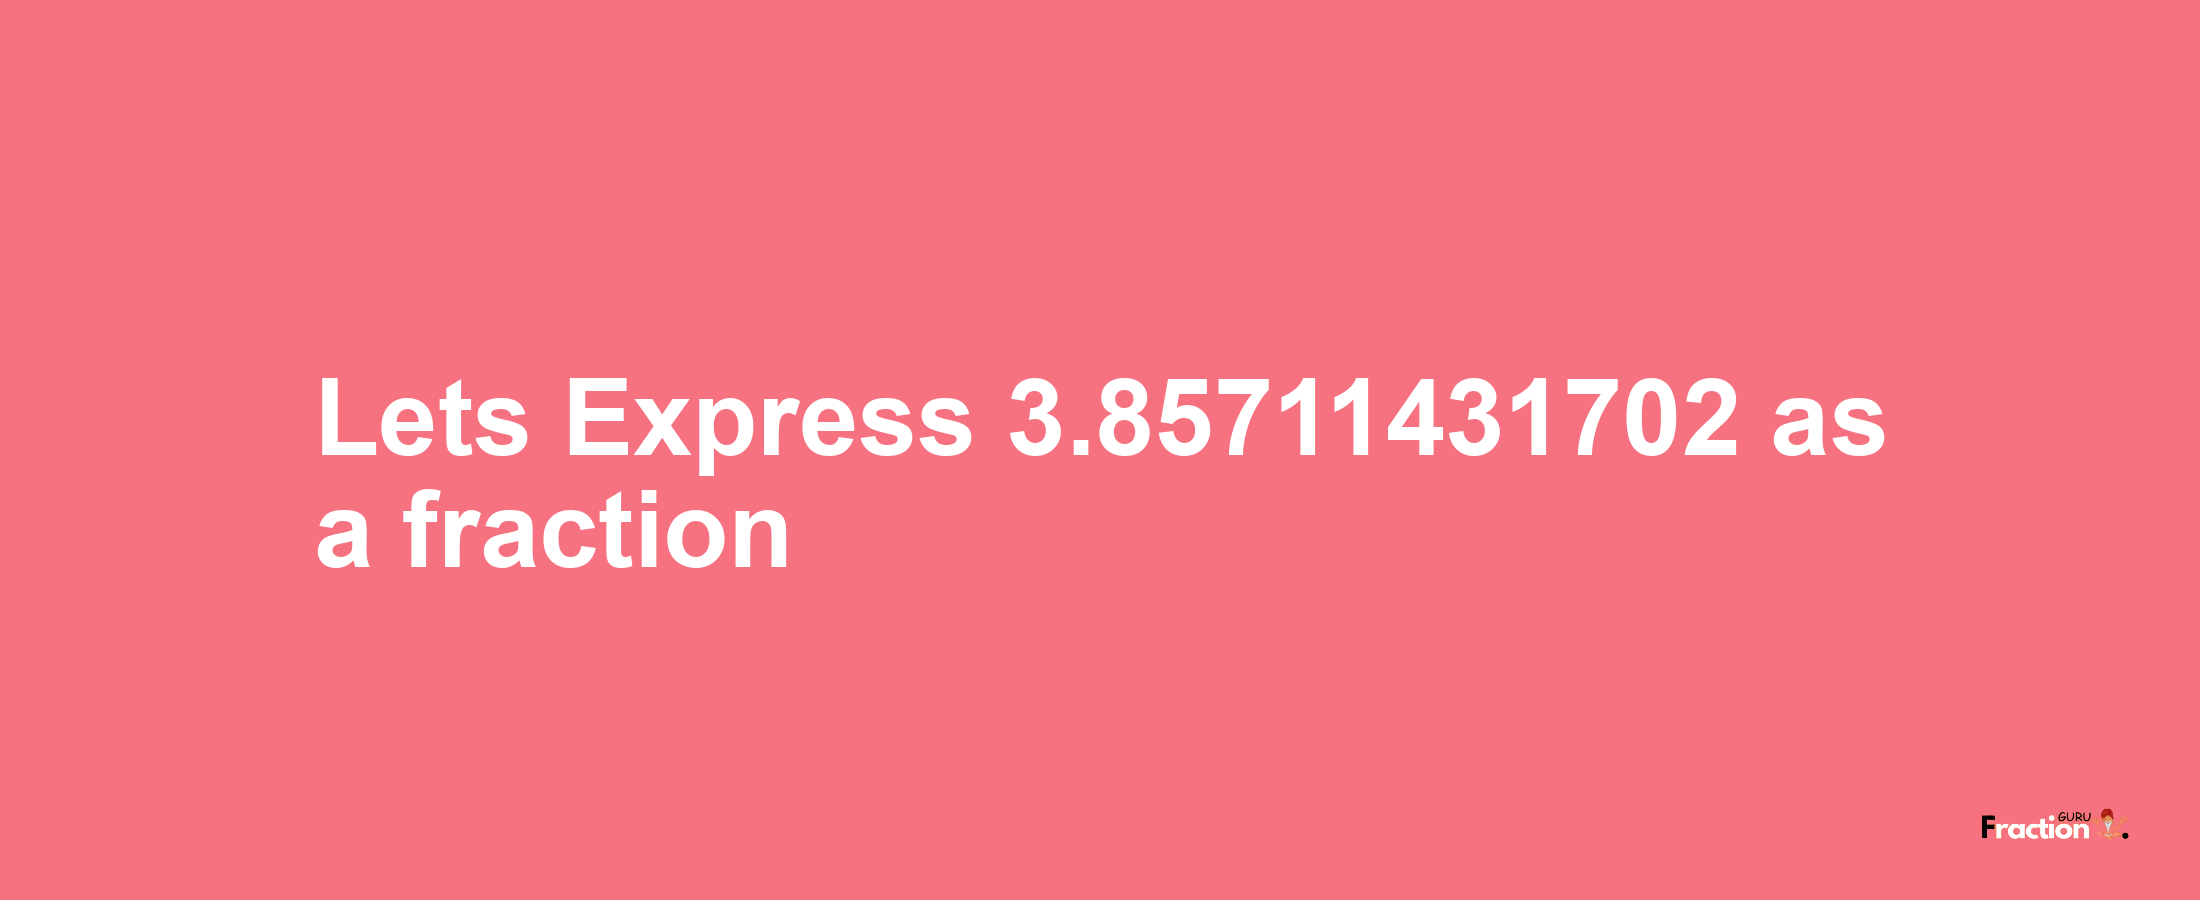 Lets Express 3.85711431702 as afraction